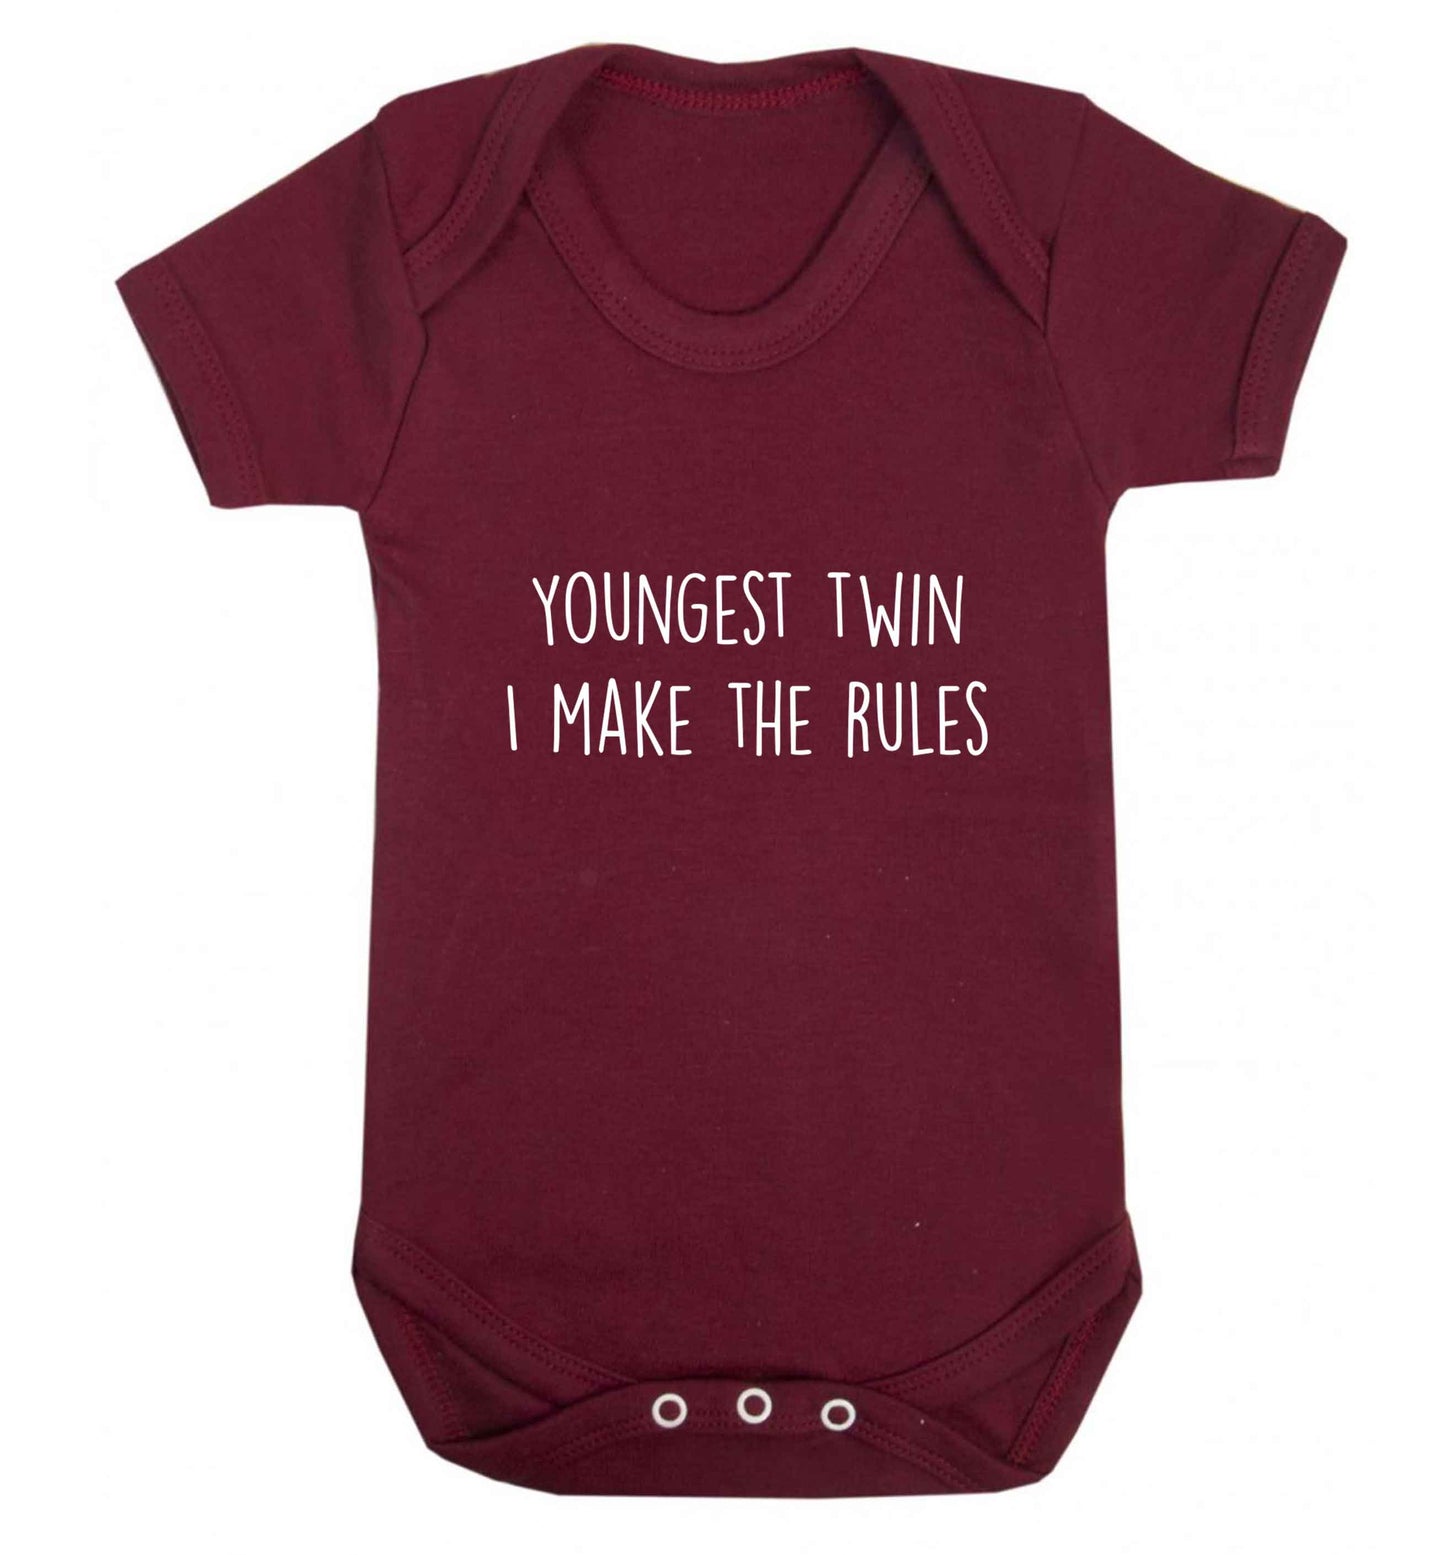 Youngest twin I make the rules baby vest maroon 18-24 months